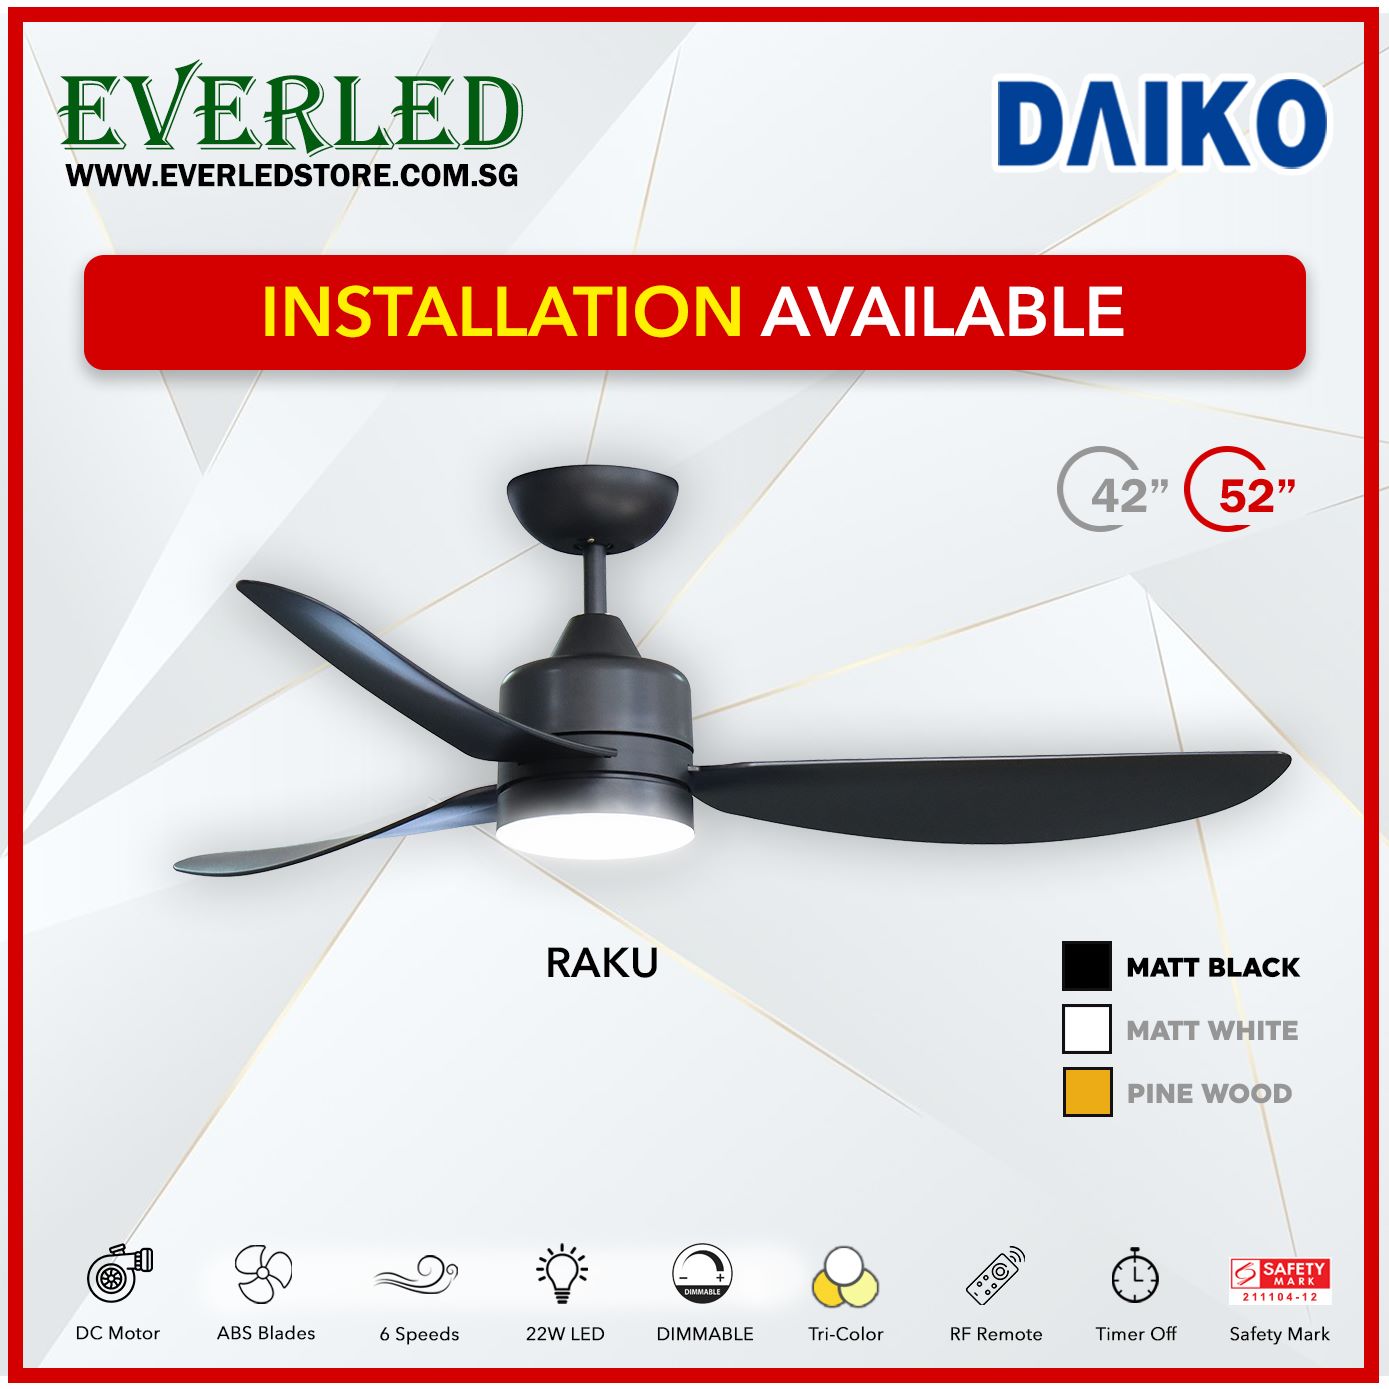 Daiko DC Raku 42"/52" with Dimmable Tri-color LED (Inverter DC Fan)